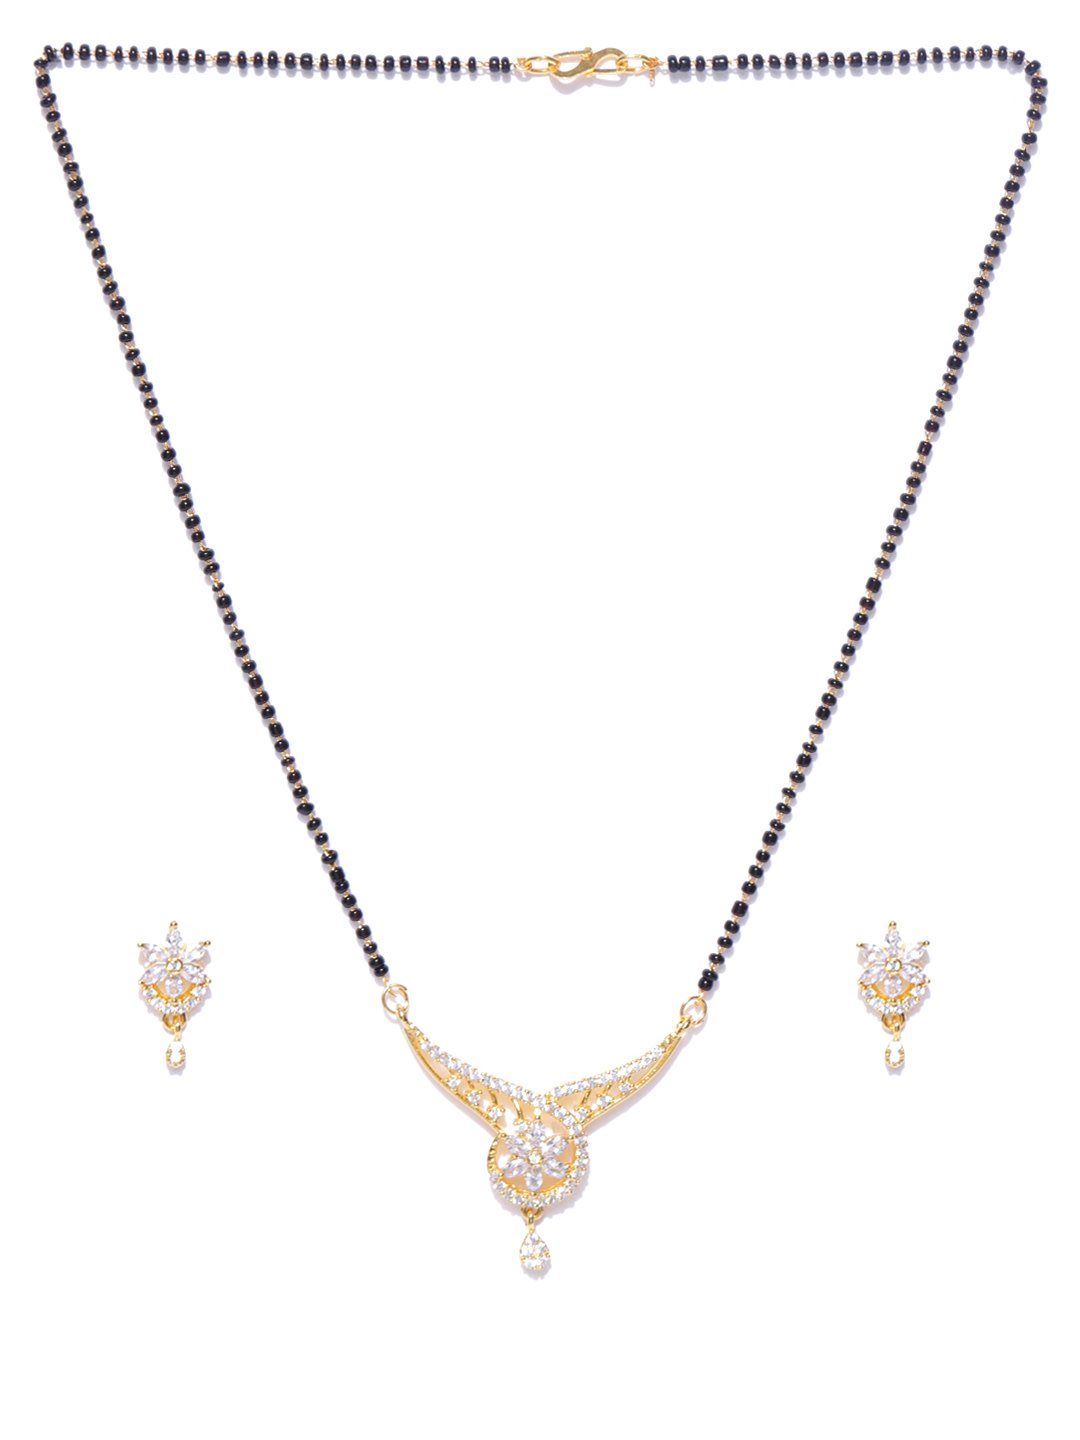 Women's Desiner Floral Shaped Gold Plated American Diamond Mangalsutra Set For Women - Priyaasi